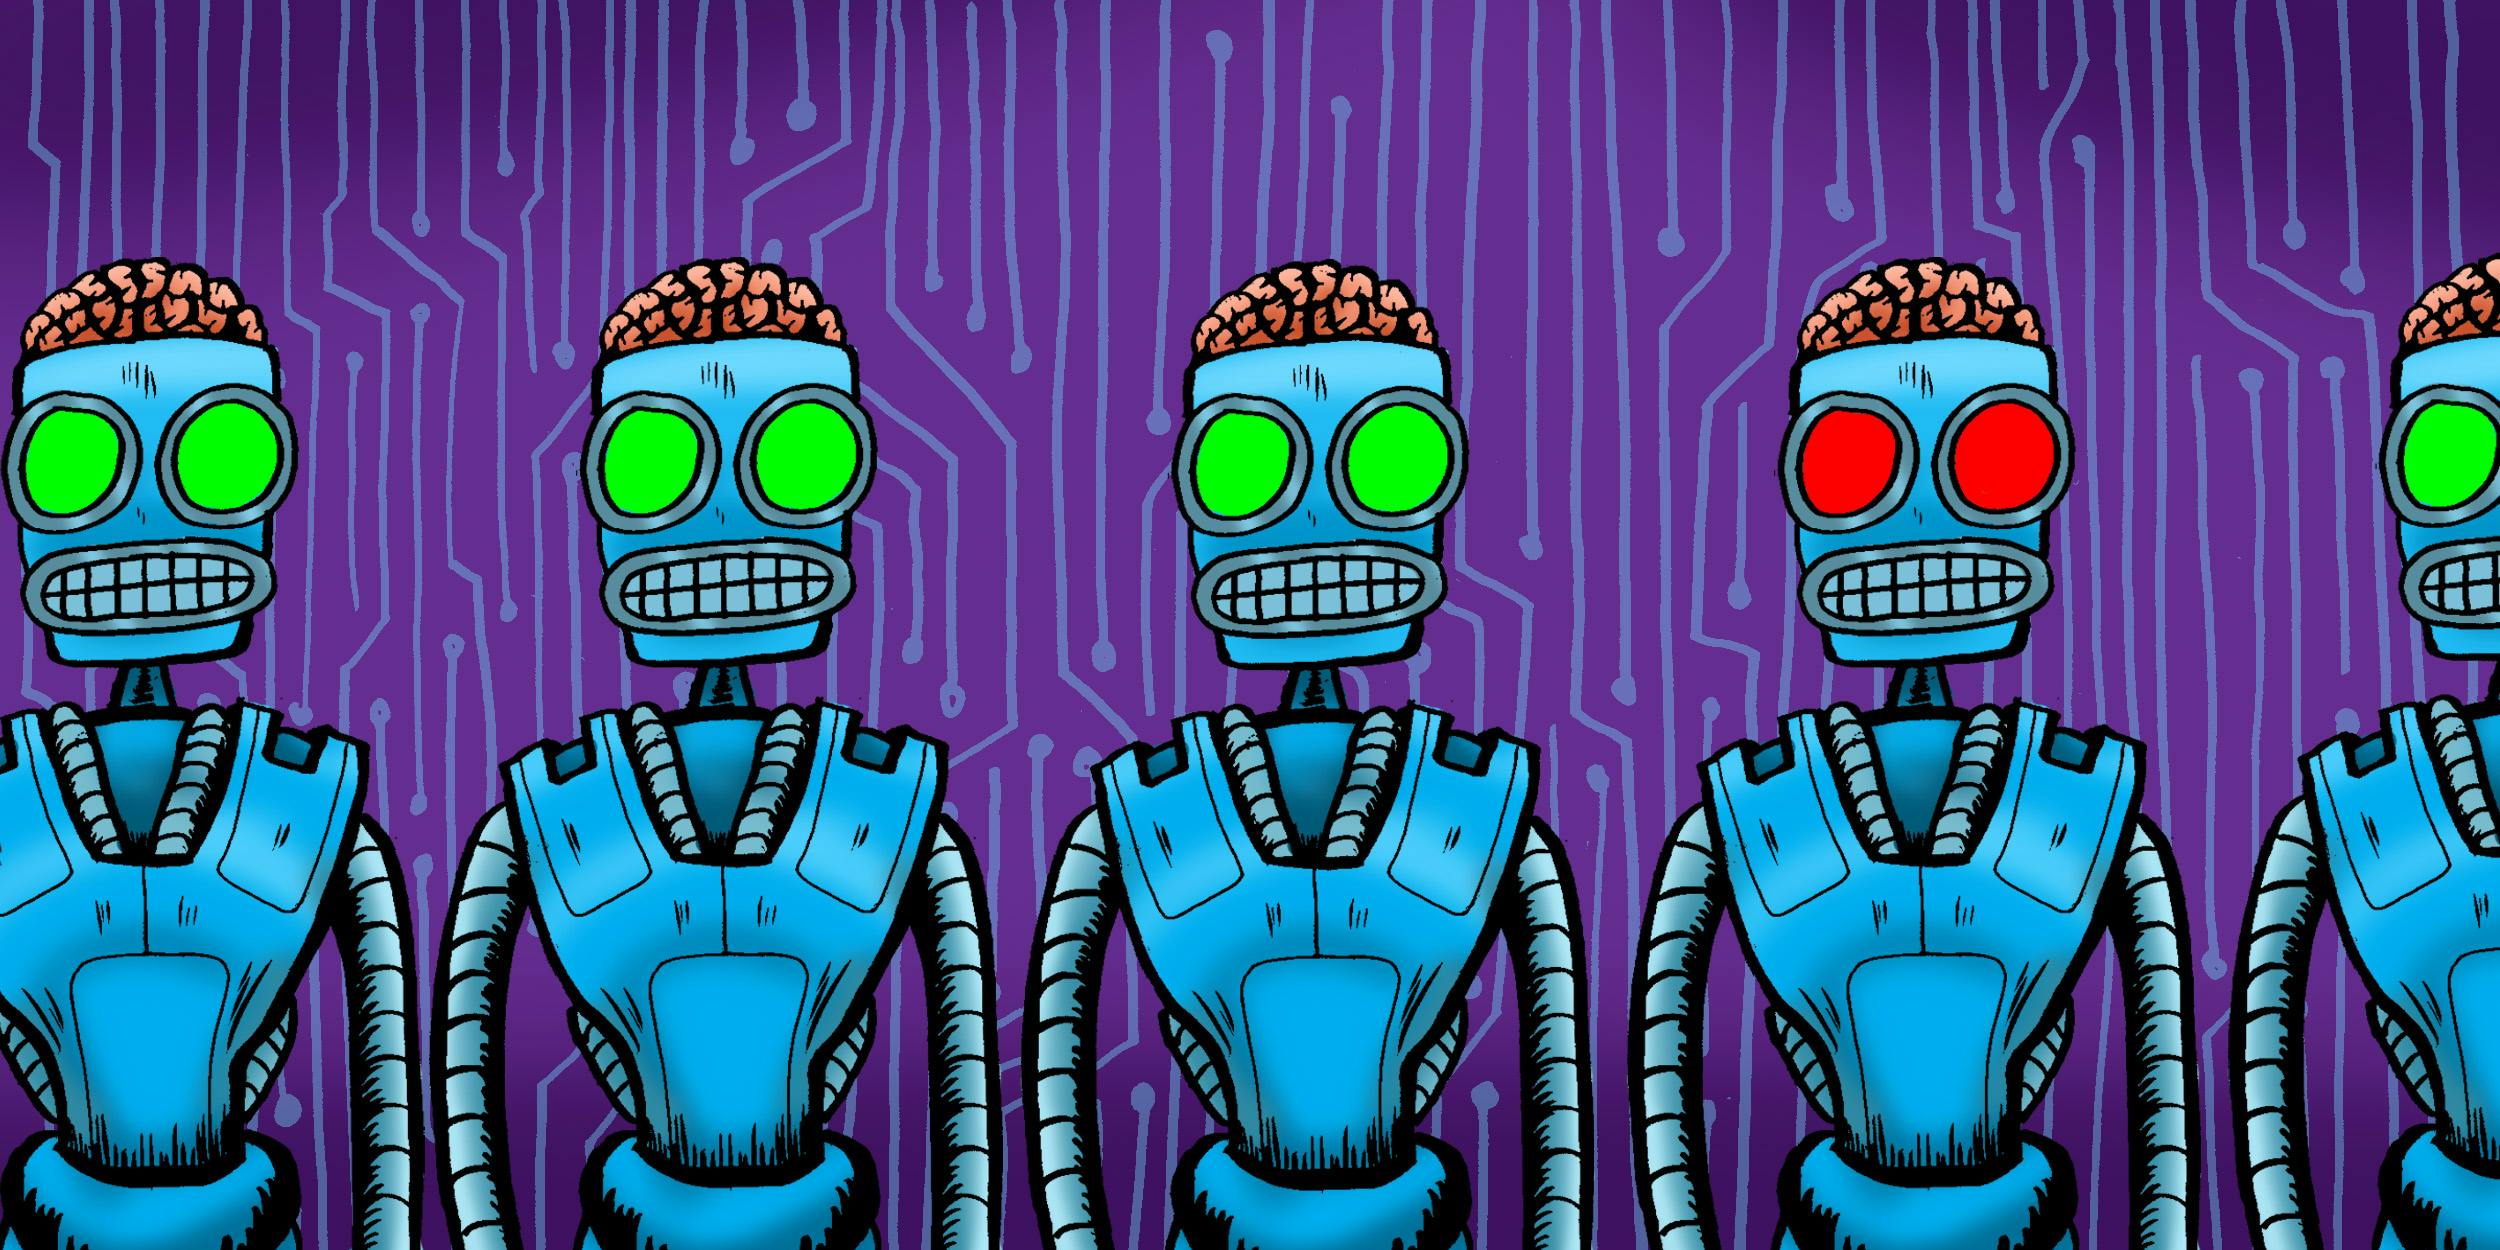 A line of identical robots with one having evil eyes